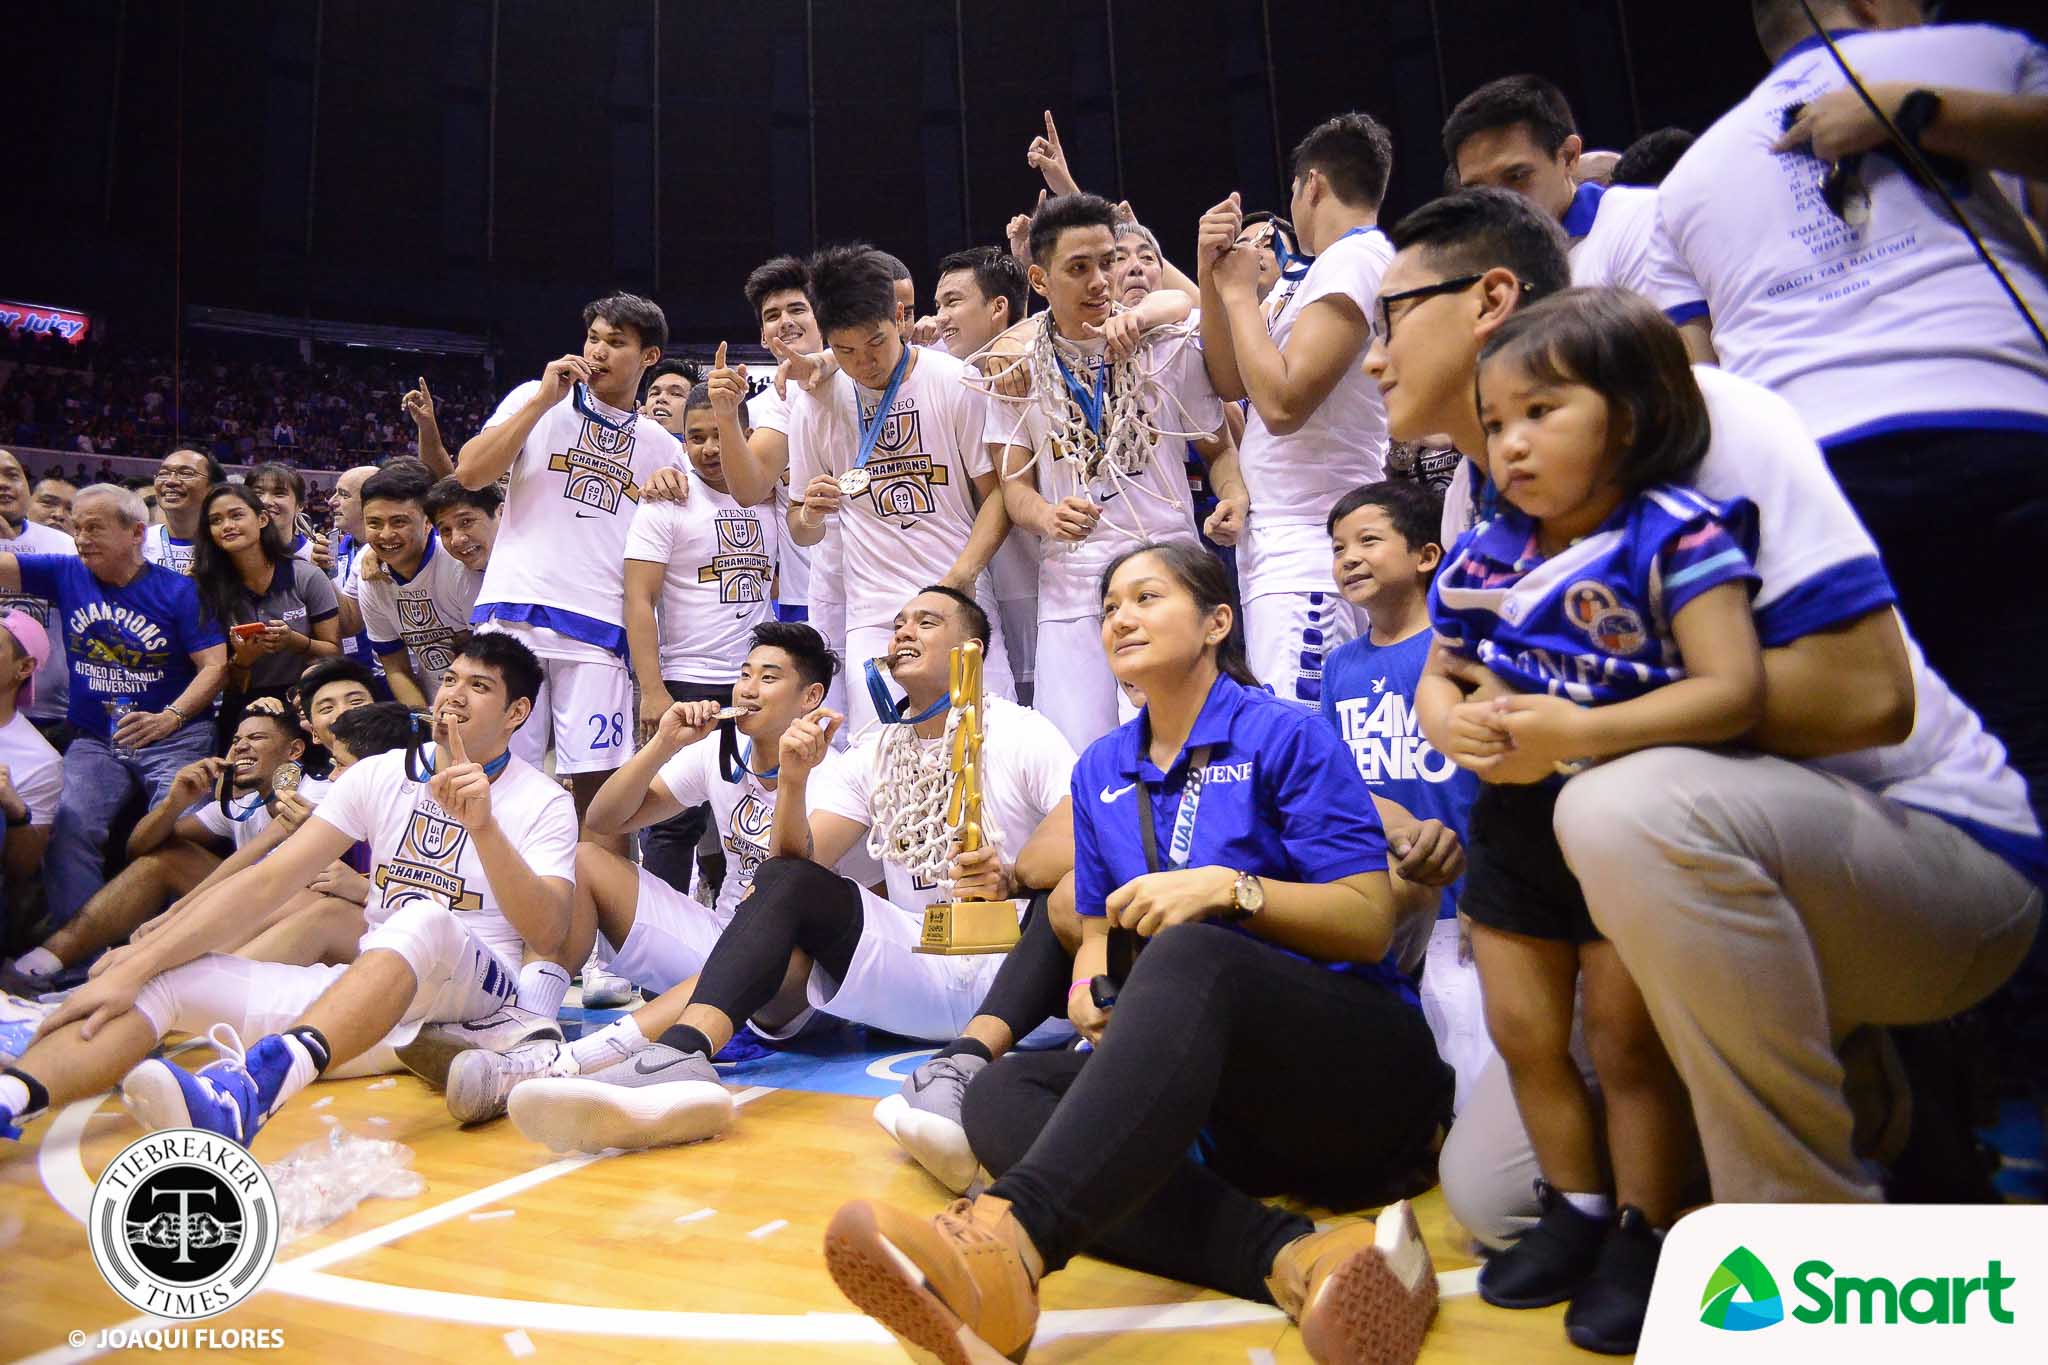 UAAP-80-Finals-G3-DLSU-vs.-ADMU-ADMU-Champion-1830 Tolentino siblings made sure to bring glory to Ateneo in final years ADMU Basketball News UAAP Volleyball  - philippine sports news